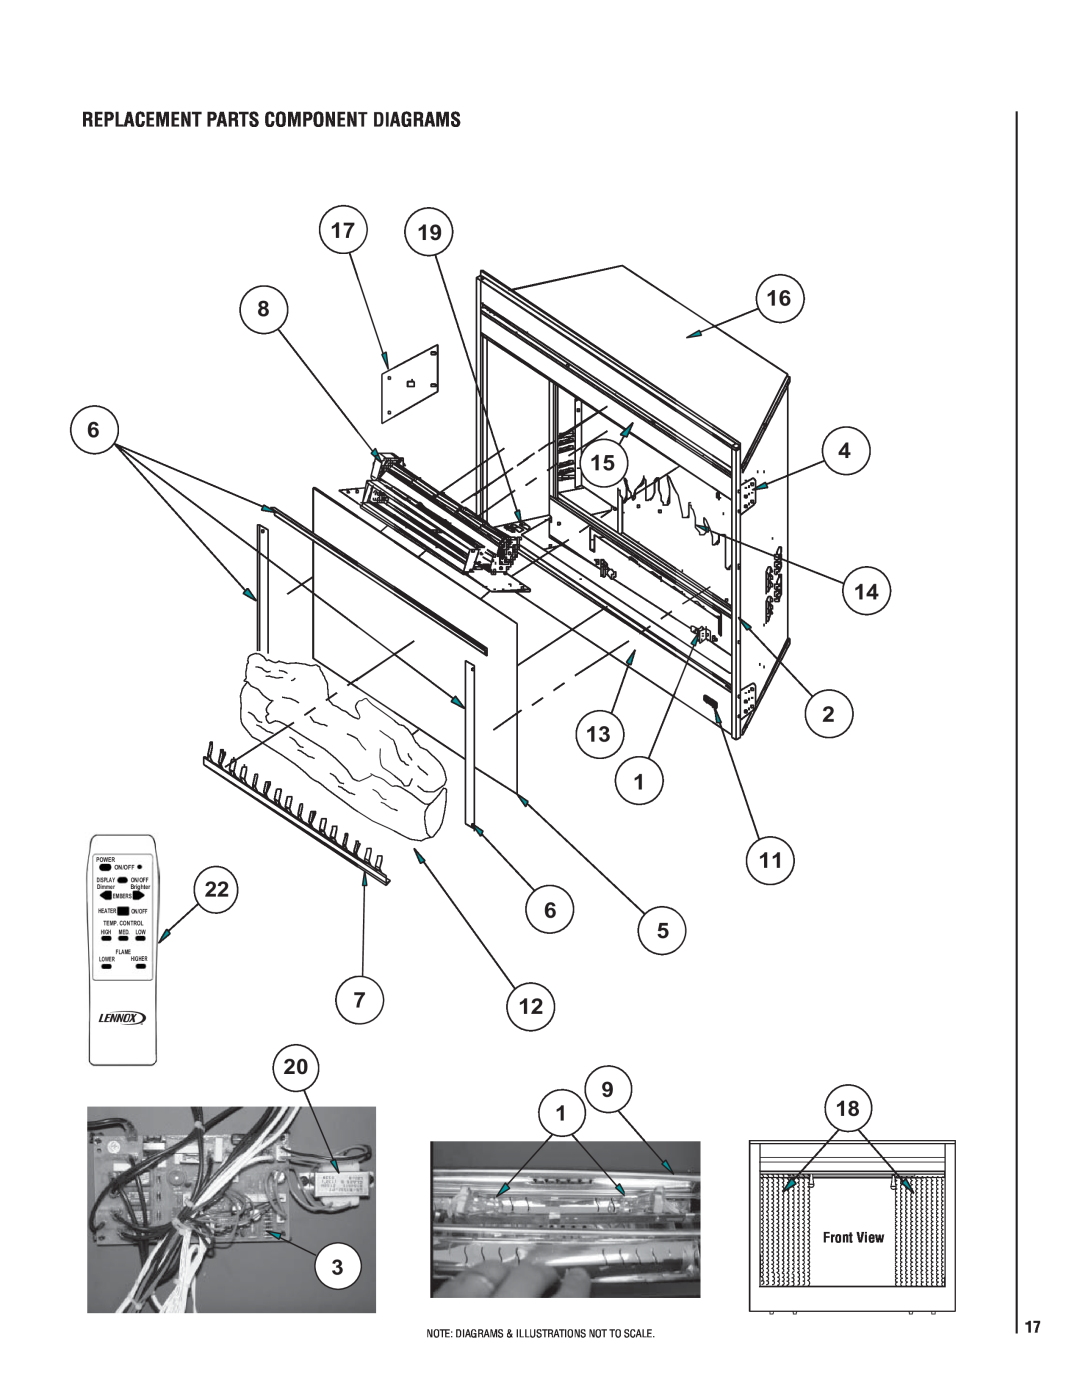 Matsushita MPE-33R Replacement Parts Component Diagrams, 712 20, Note Diagrams & Illustrations Not To Scale, On/Off, High 